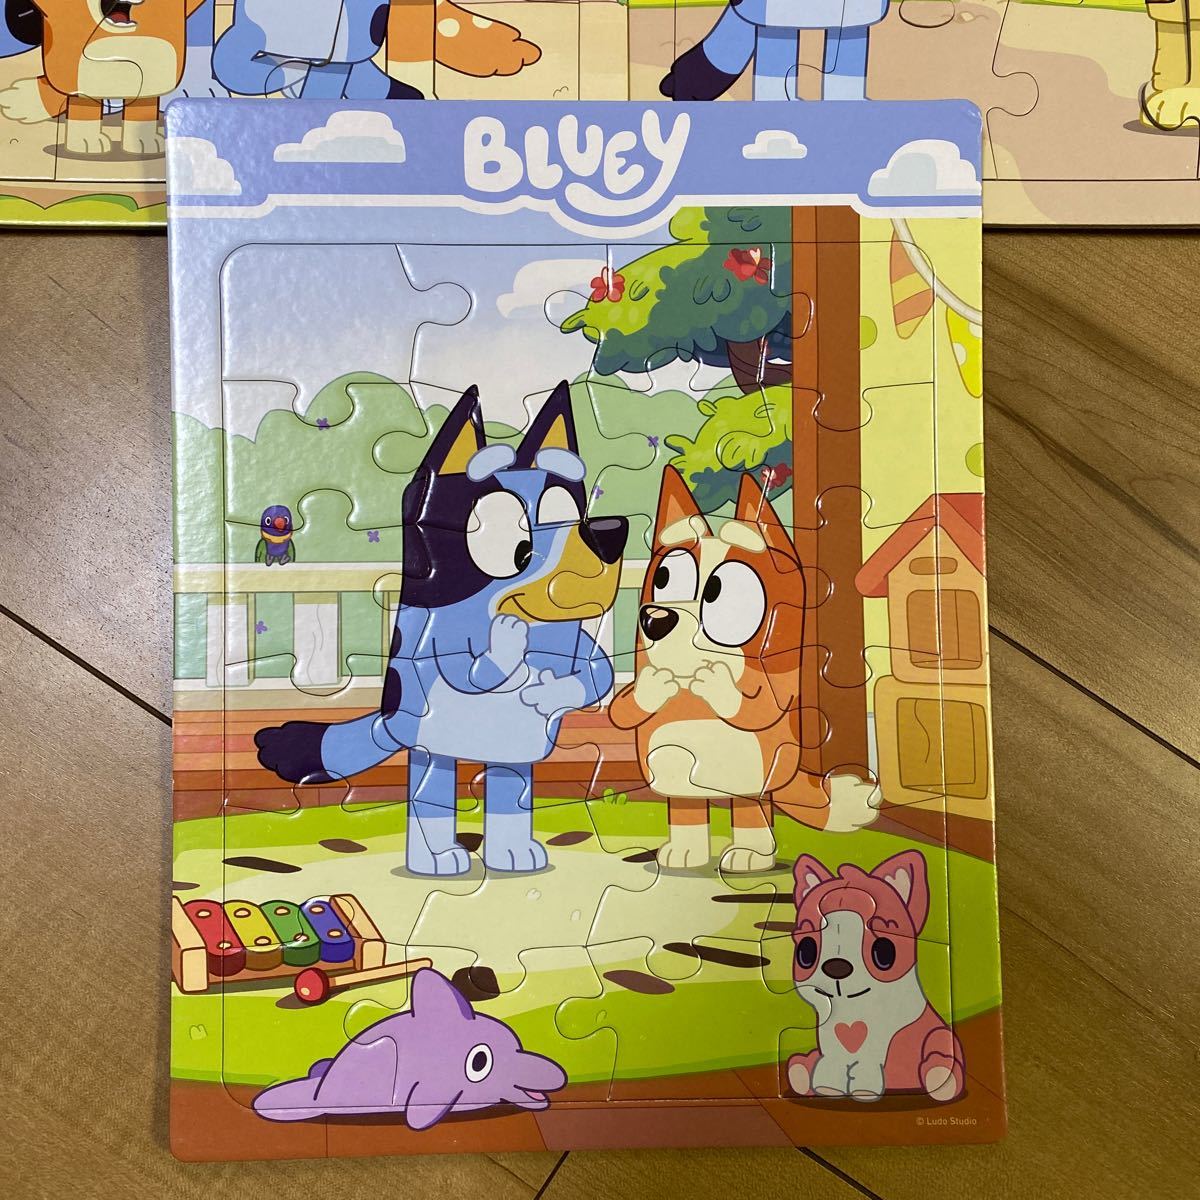  abroad anime blue iBluey puzzle set 3 sheets PRE SCHOOL PUZZLES intellectual training toy 